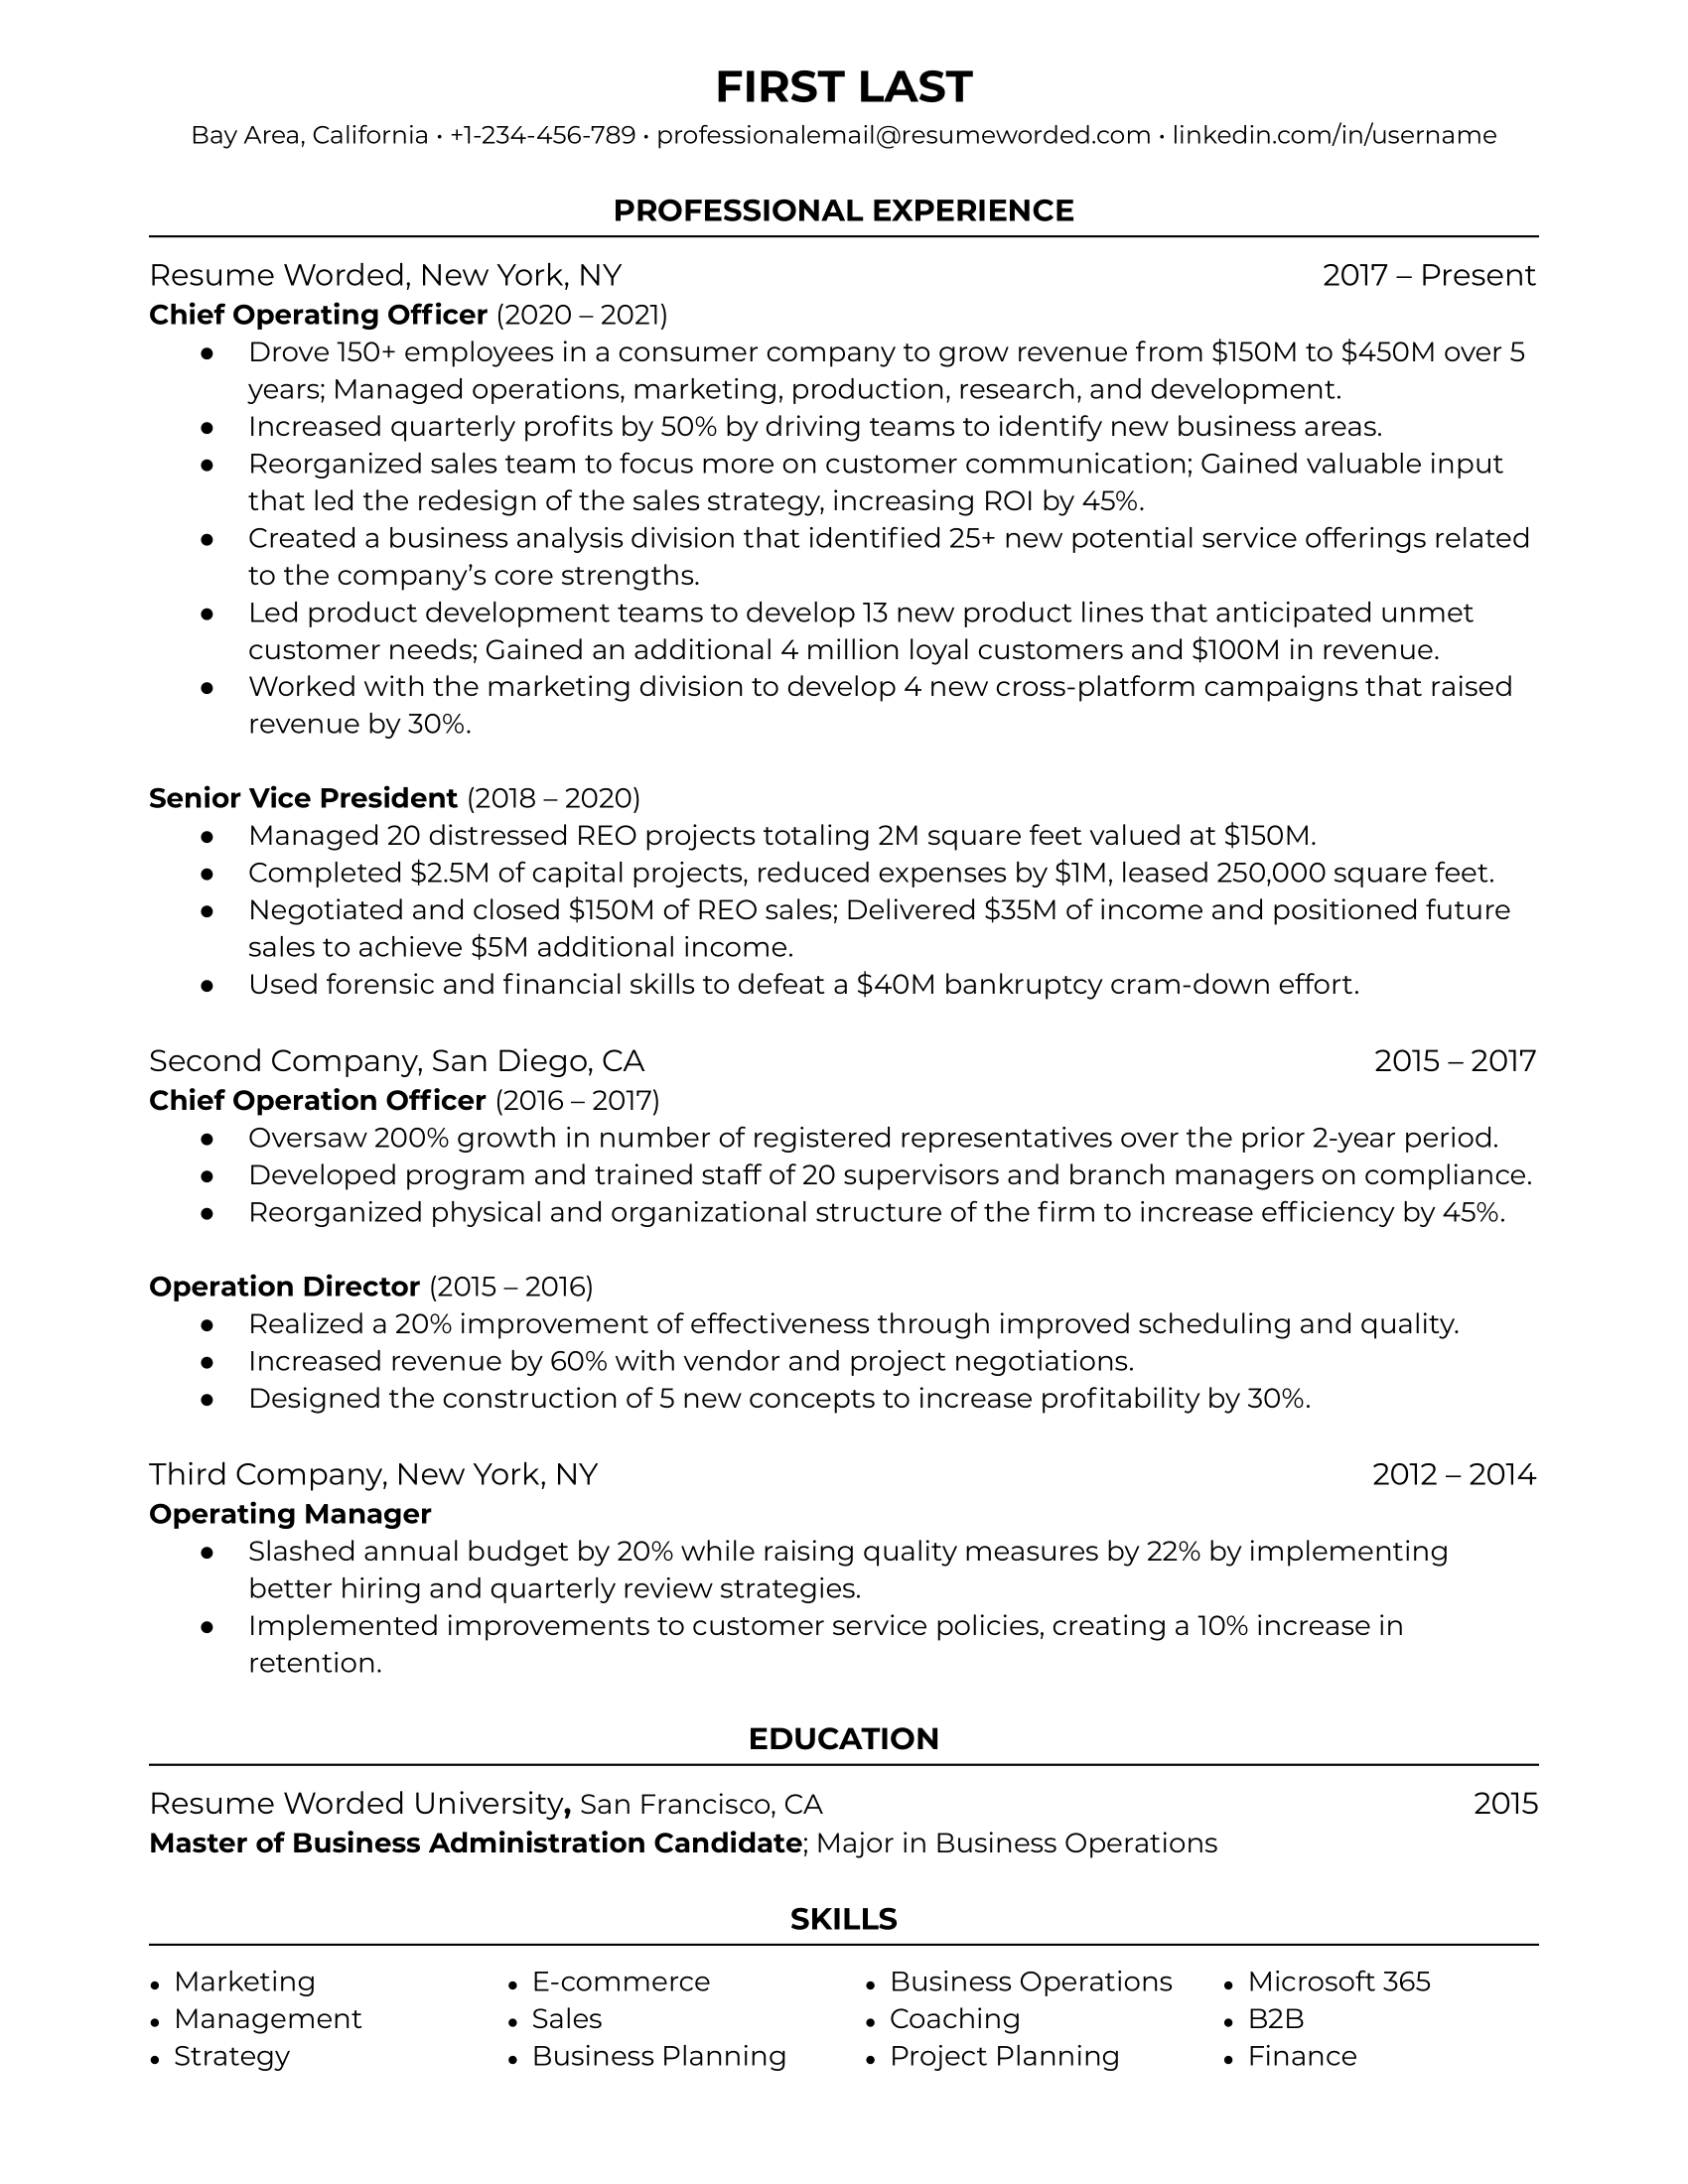 Chief Operating Officer resume template example focusing on the most relevant skills and achievements